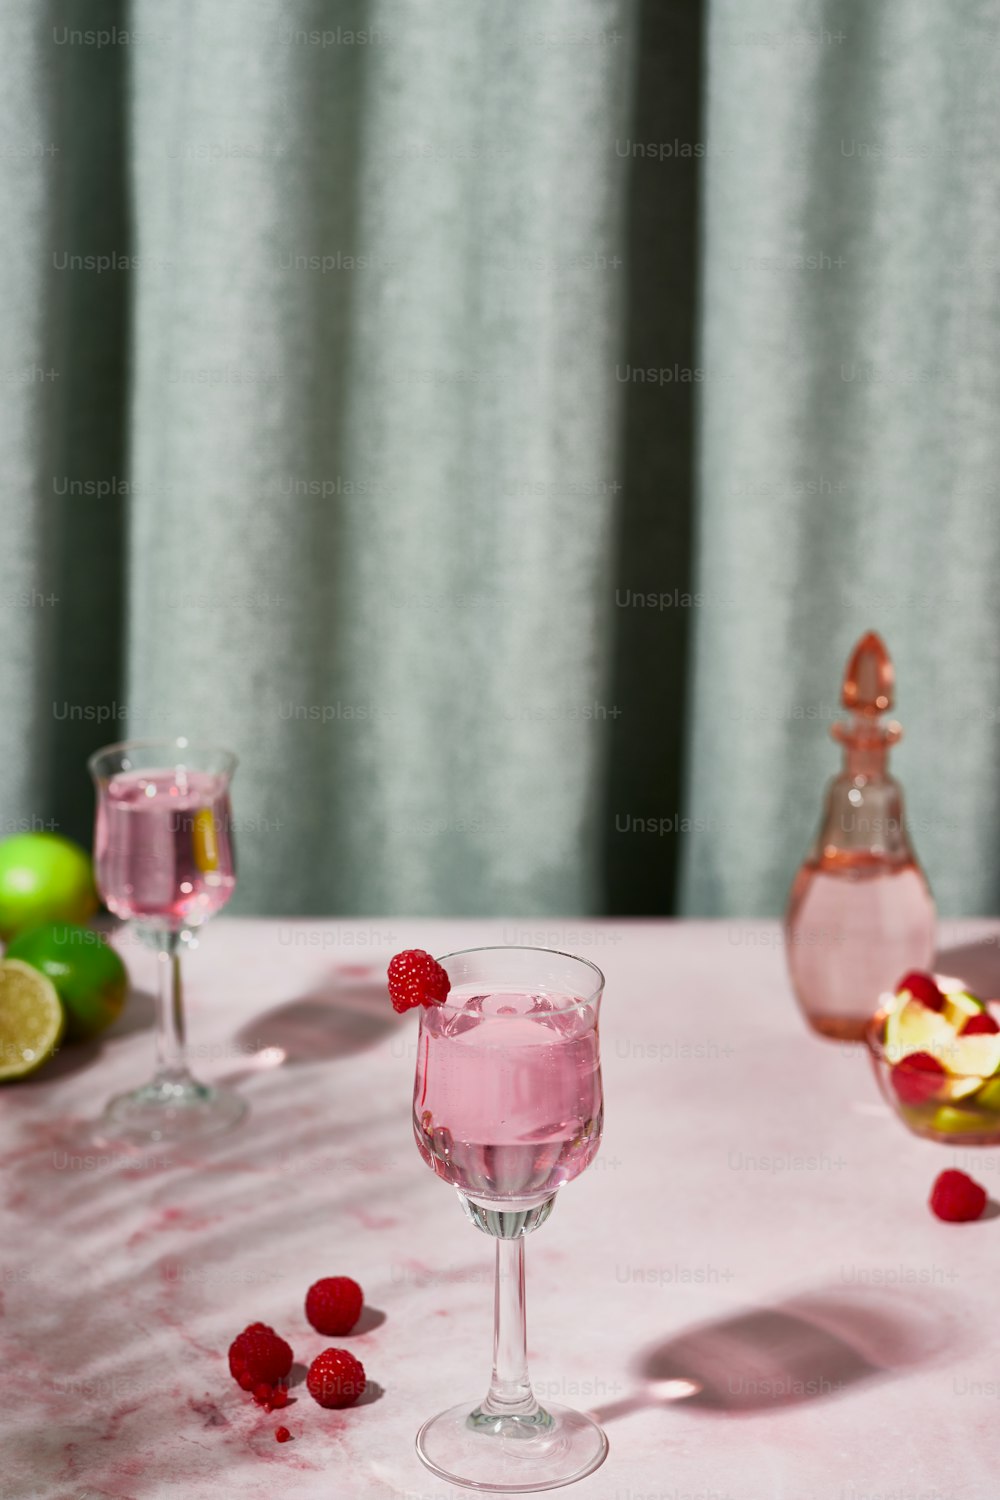 two glasses of raspberry wine on a table